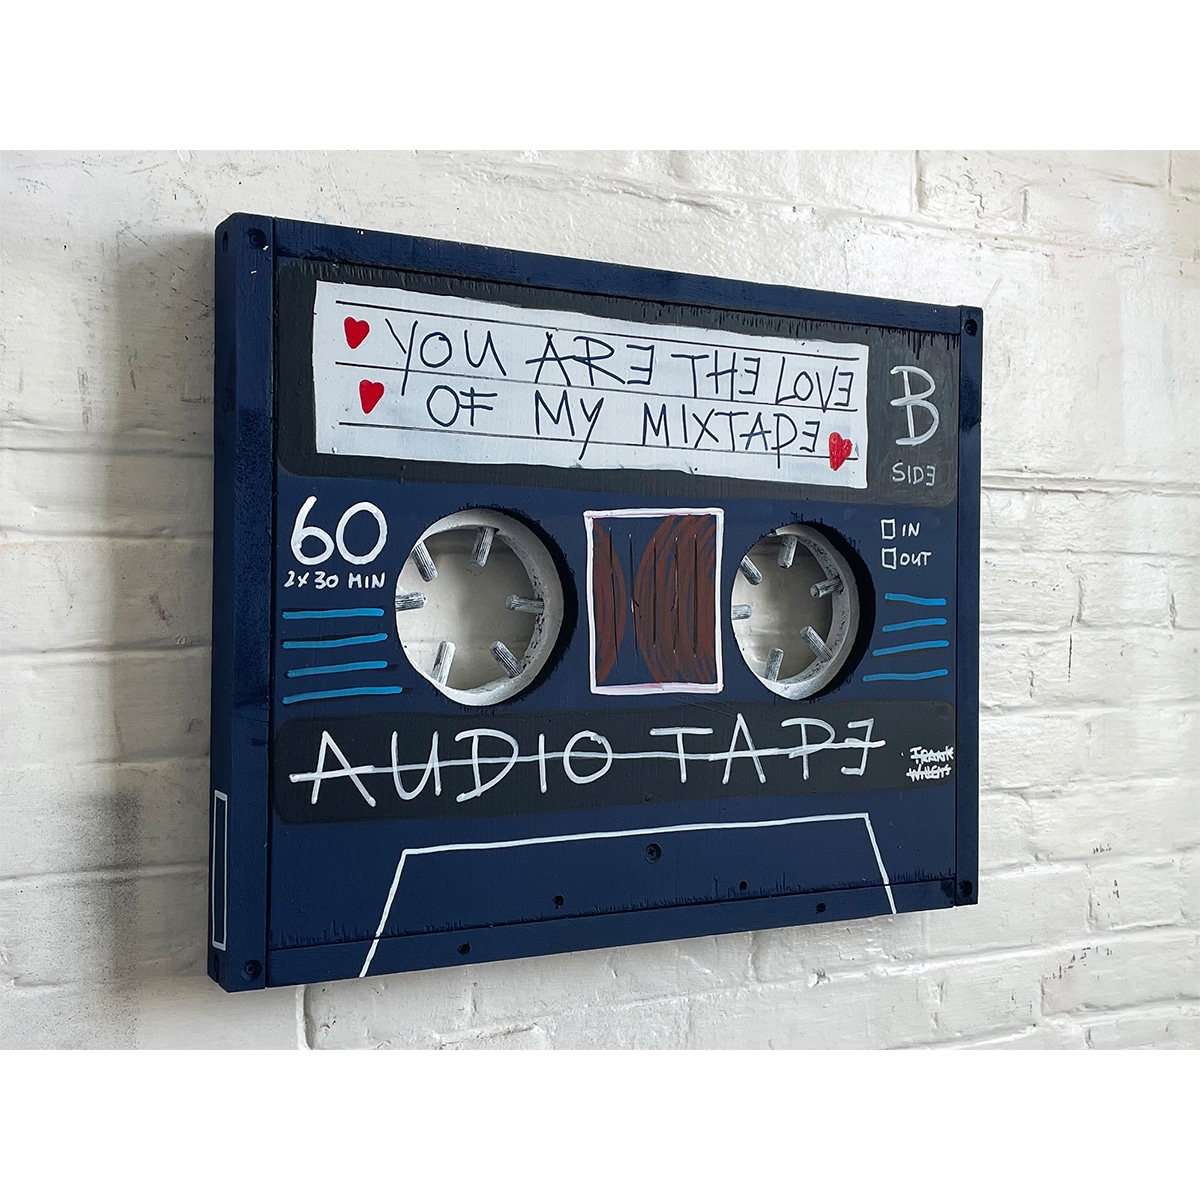 Artwork -_0001_MIXTAPE - YOU ARE THE LOVE OF MY MIXTAPE 01 - Frank Willems